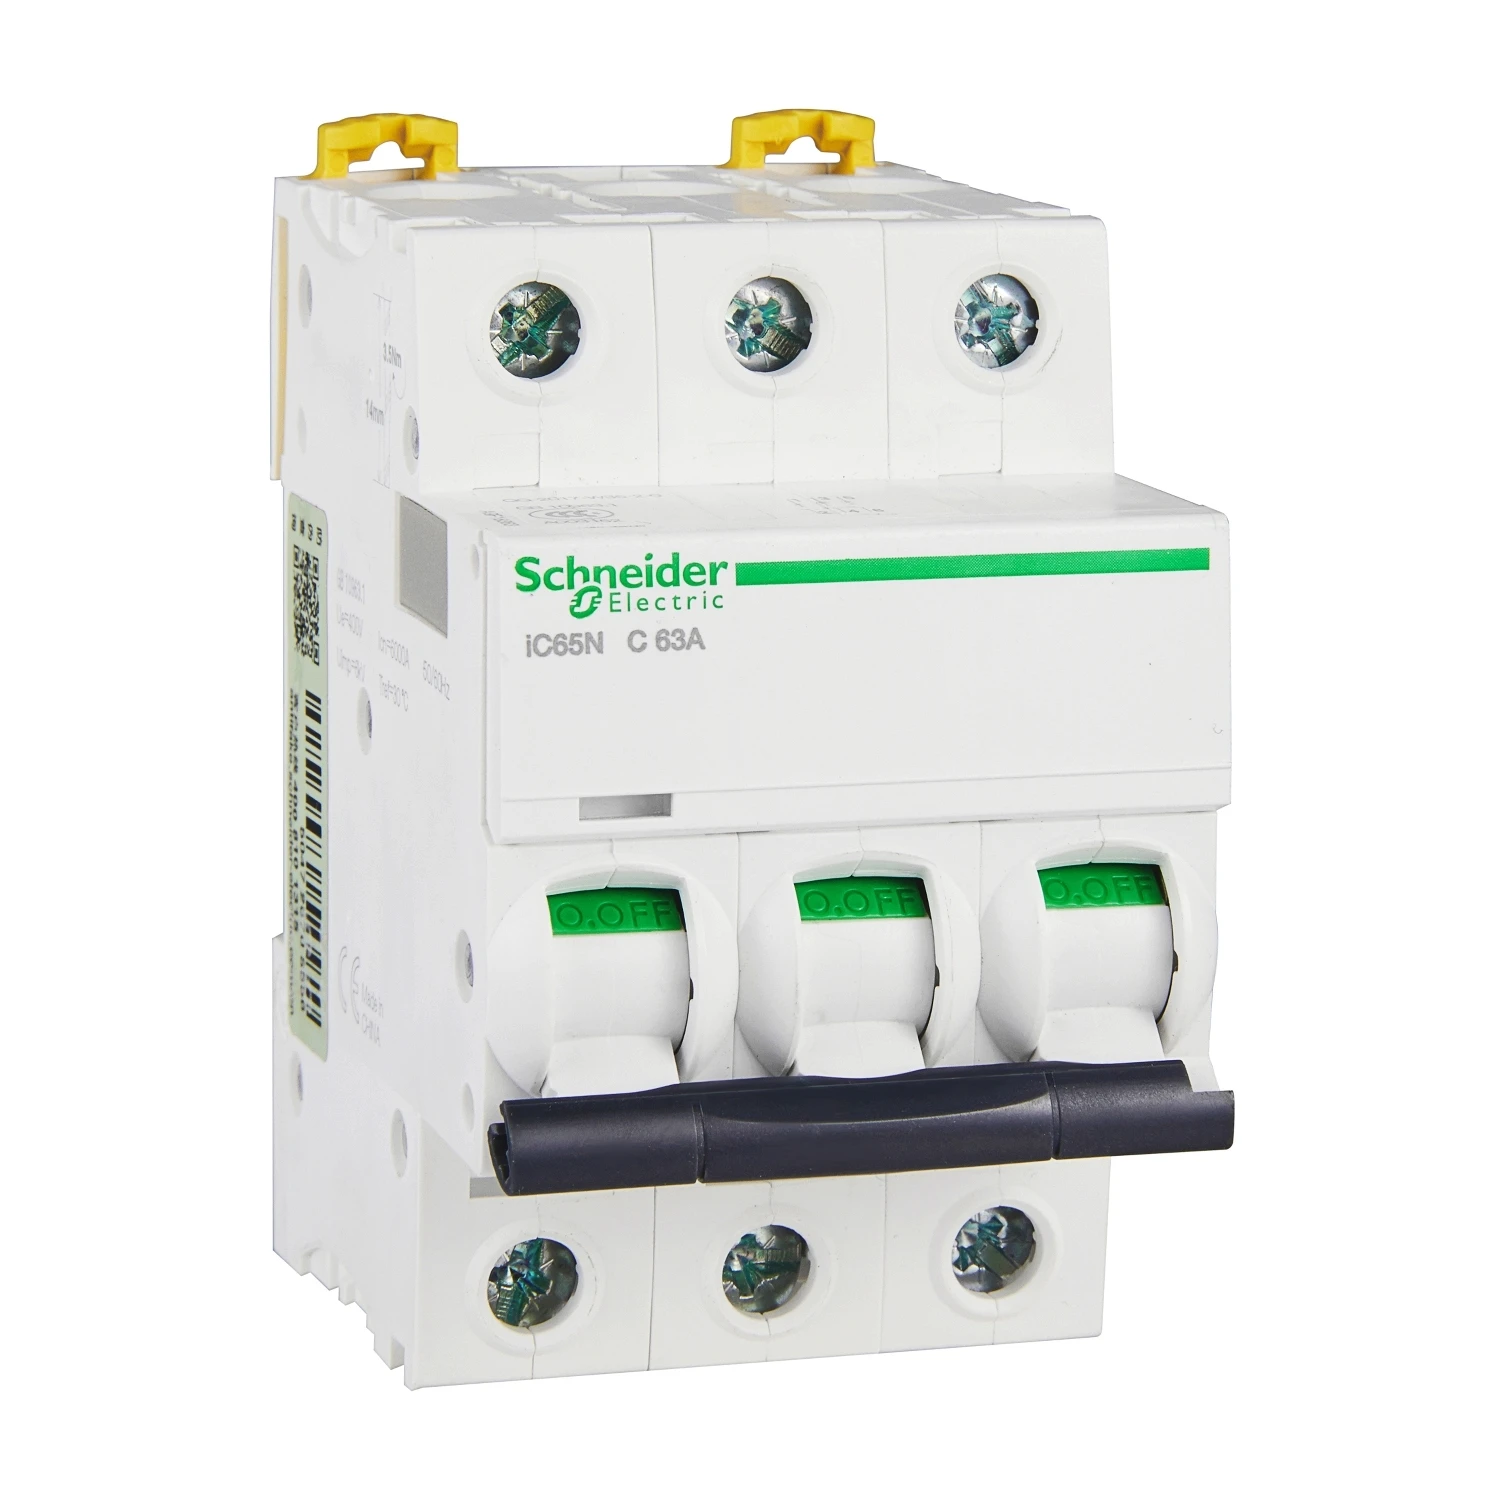 Schneider iC65N-C The Ultimate Miniature Circuit Breaker for Efficient Electrical Safety 1-80A MCB 1-4p